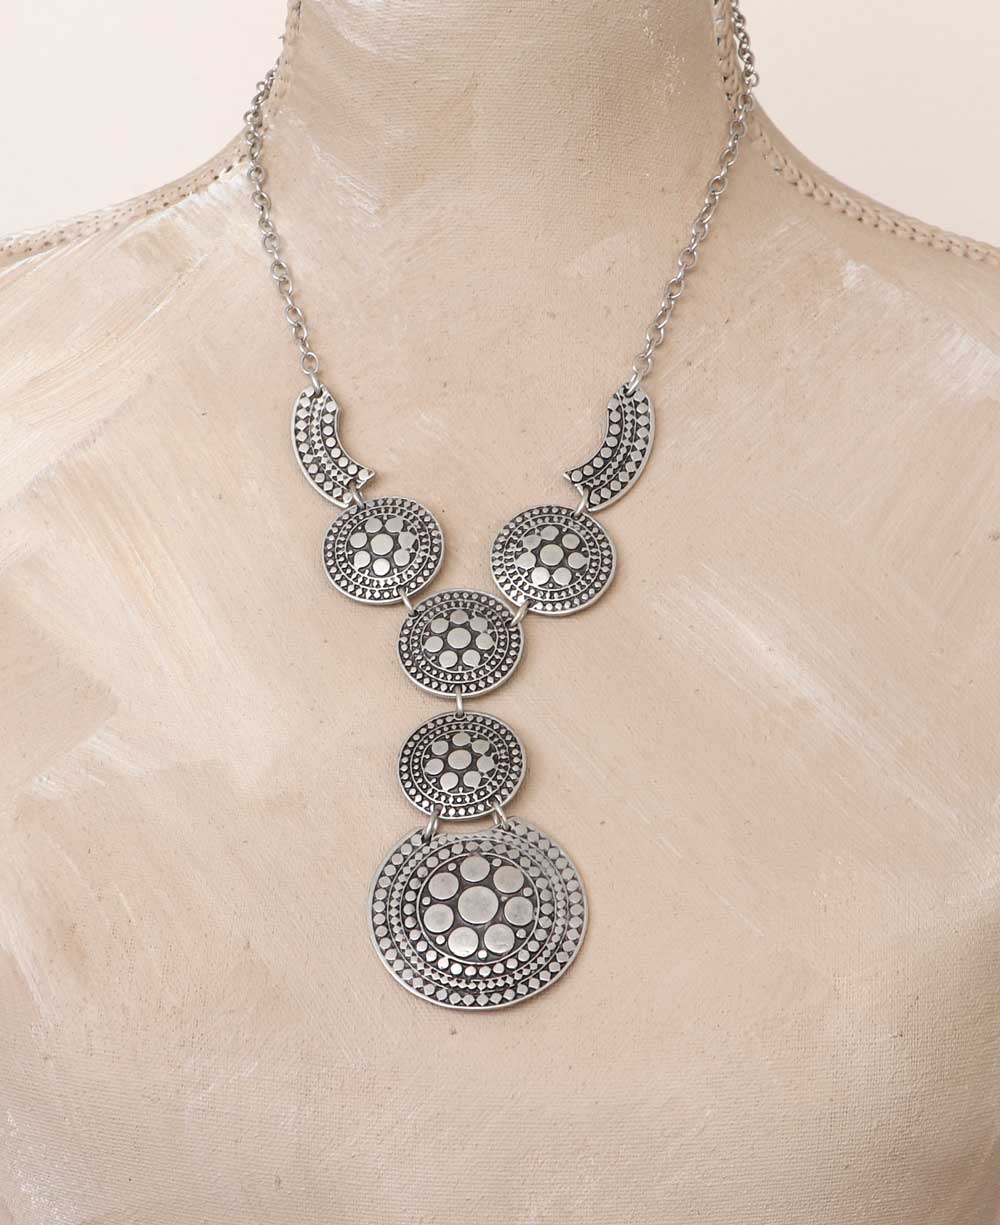 Y-Shaped Pewter Necklace with Floral Discs